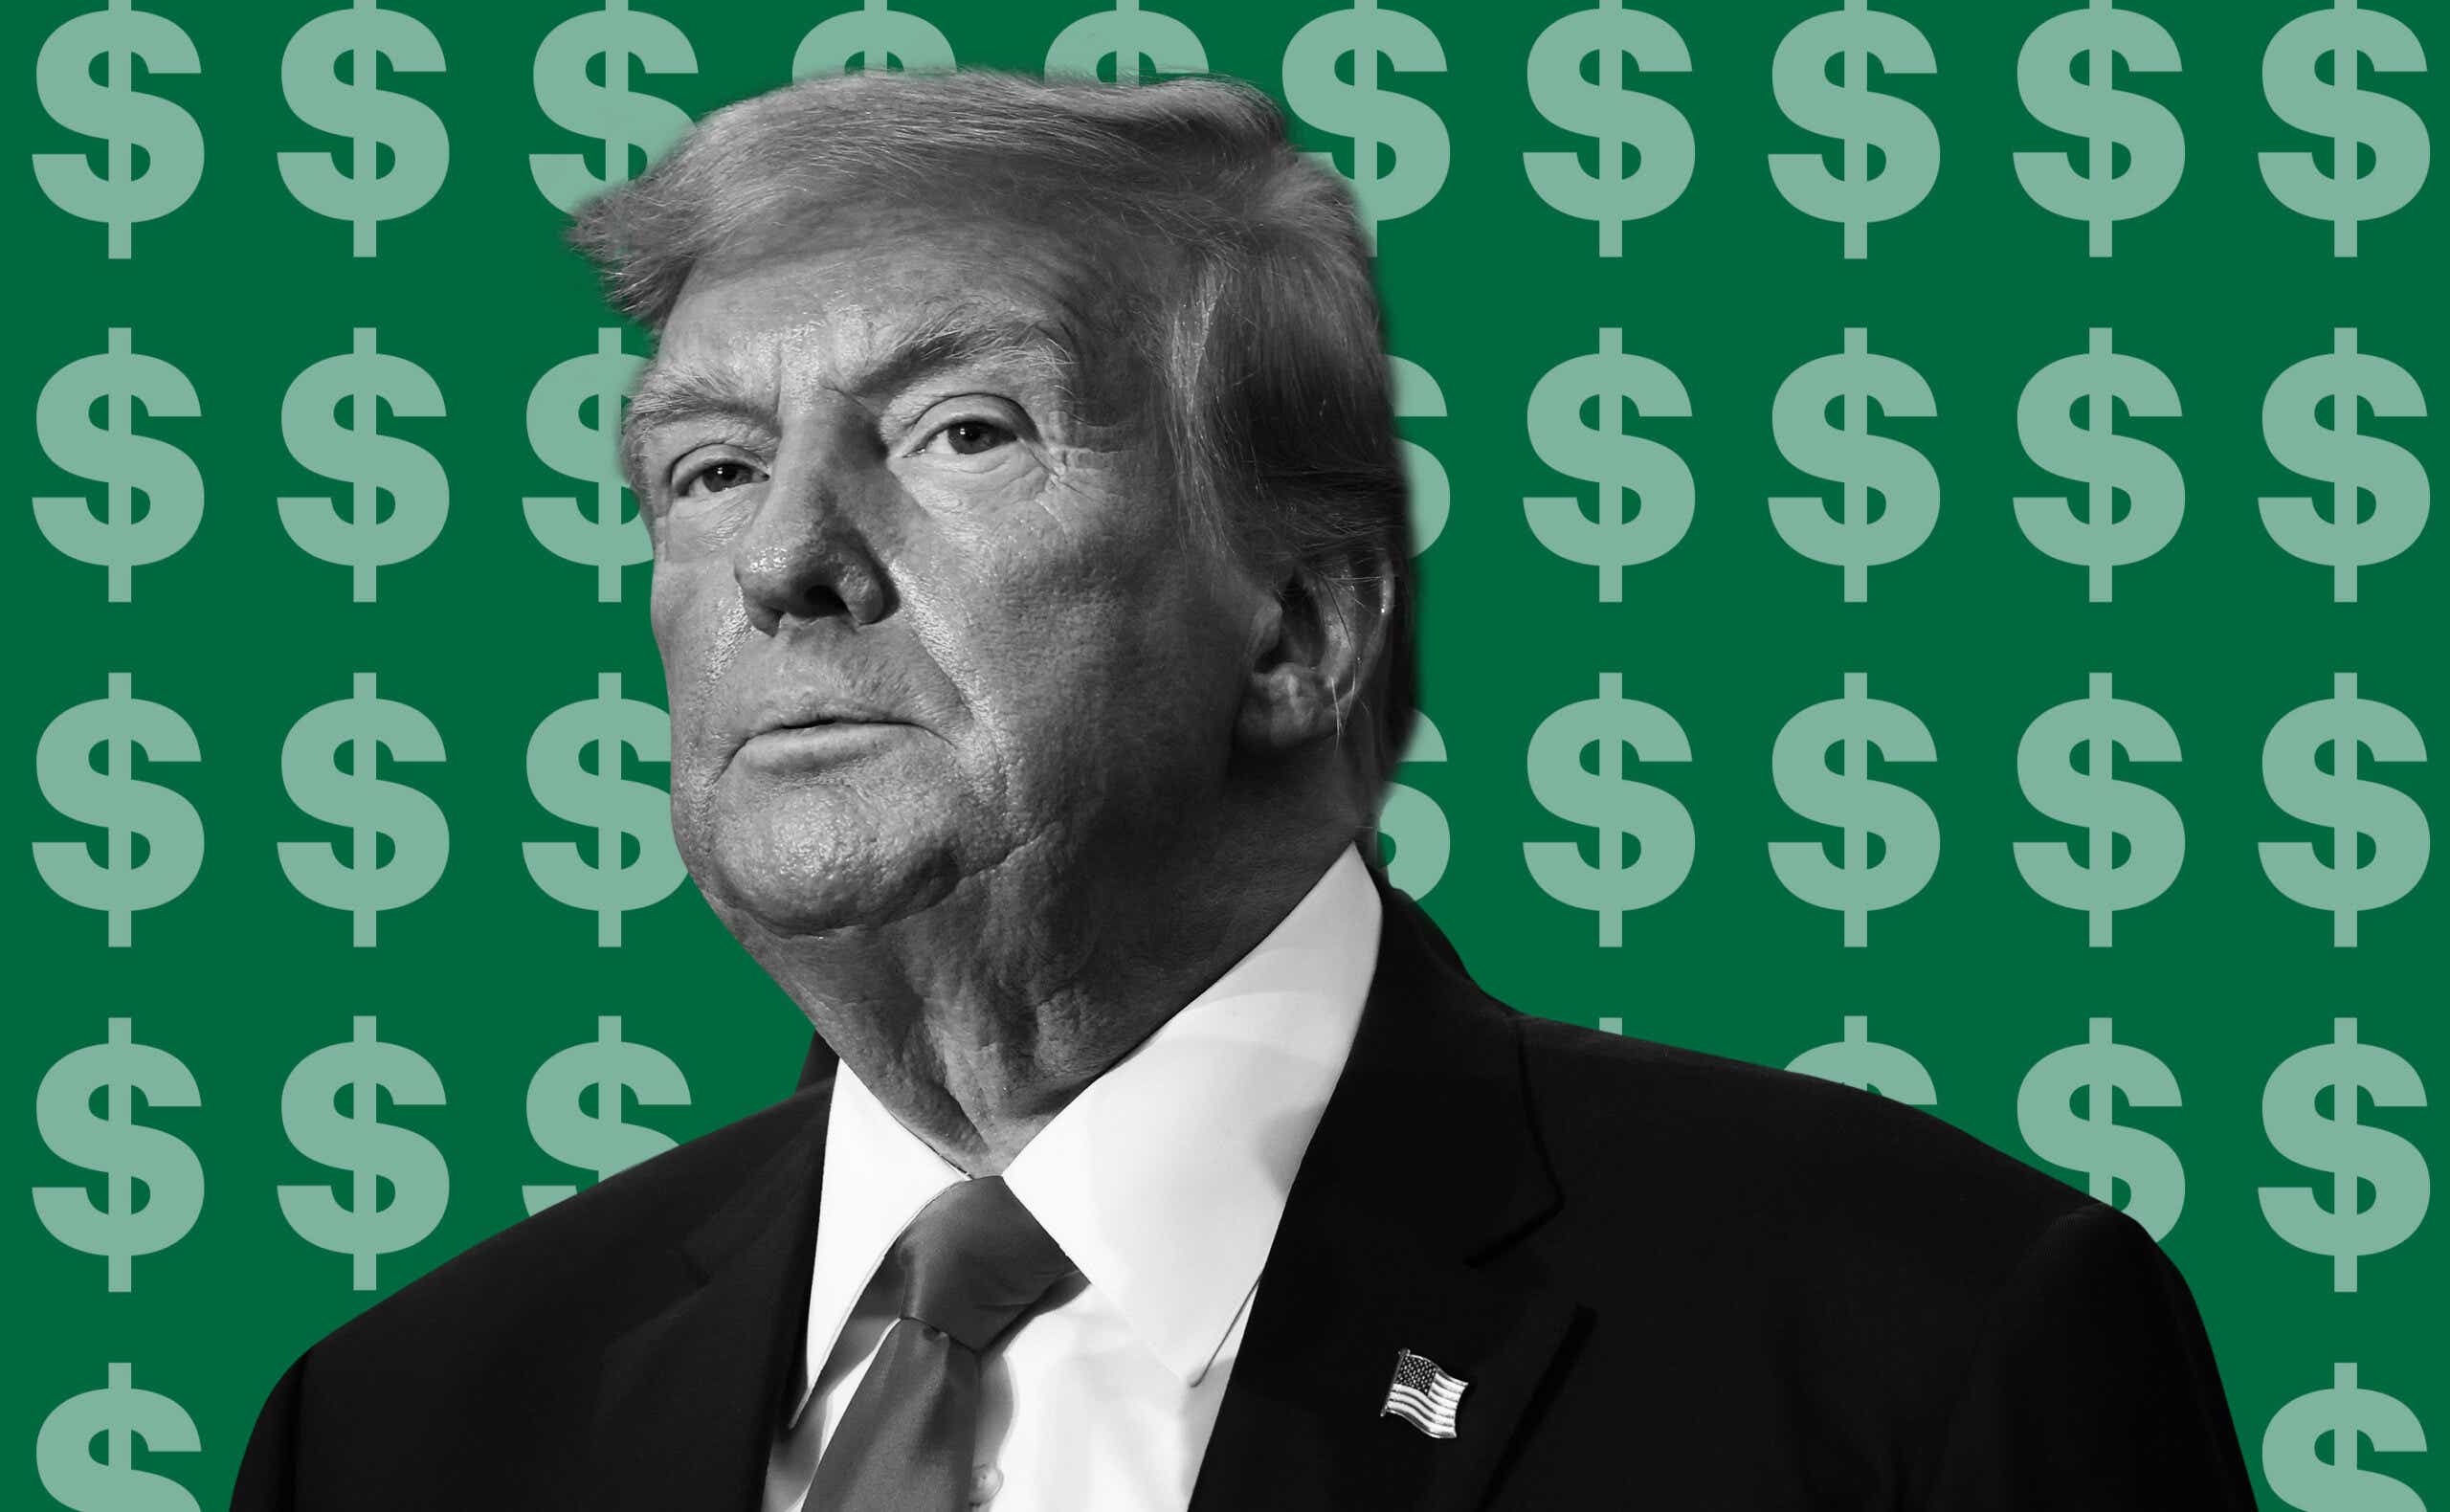 donald trump in front of a background of dollar signs